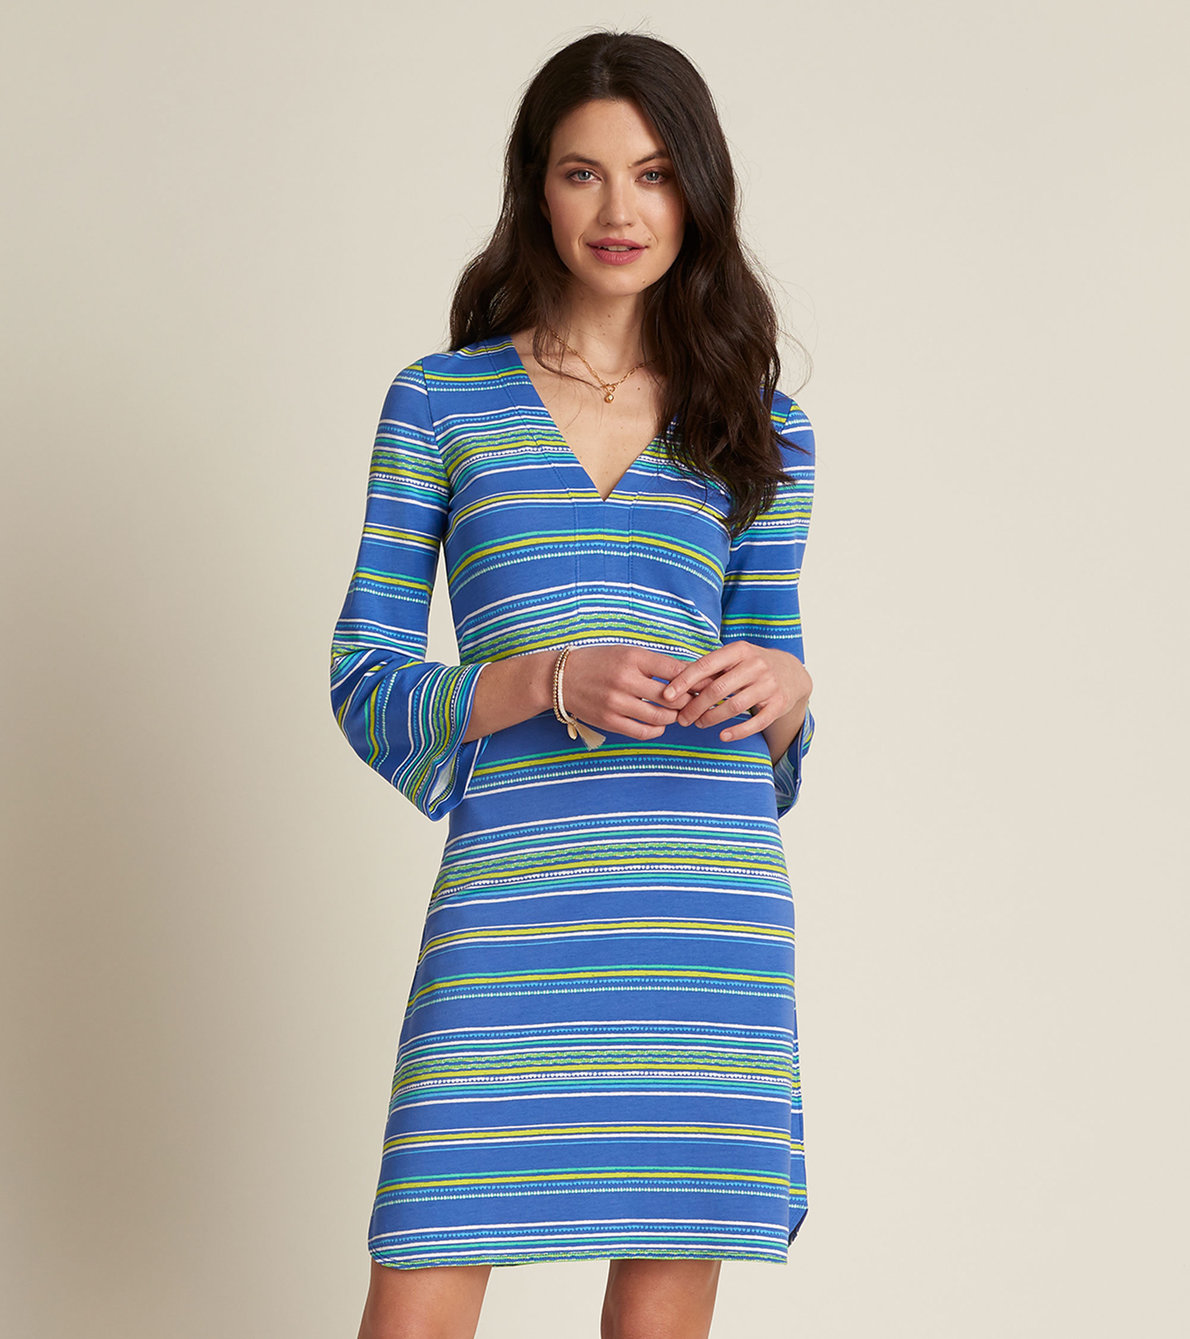 View larger image of Ashley Dress - Tropical Stripes